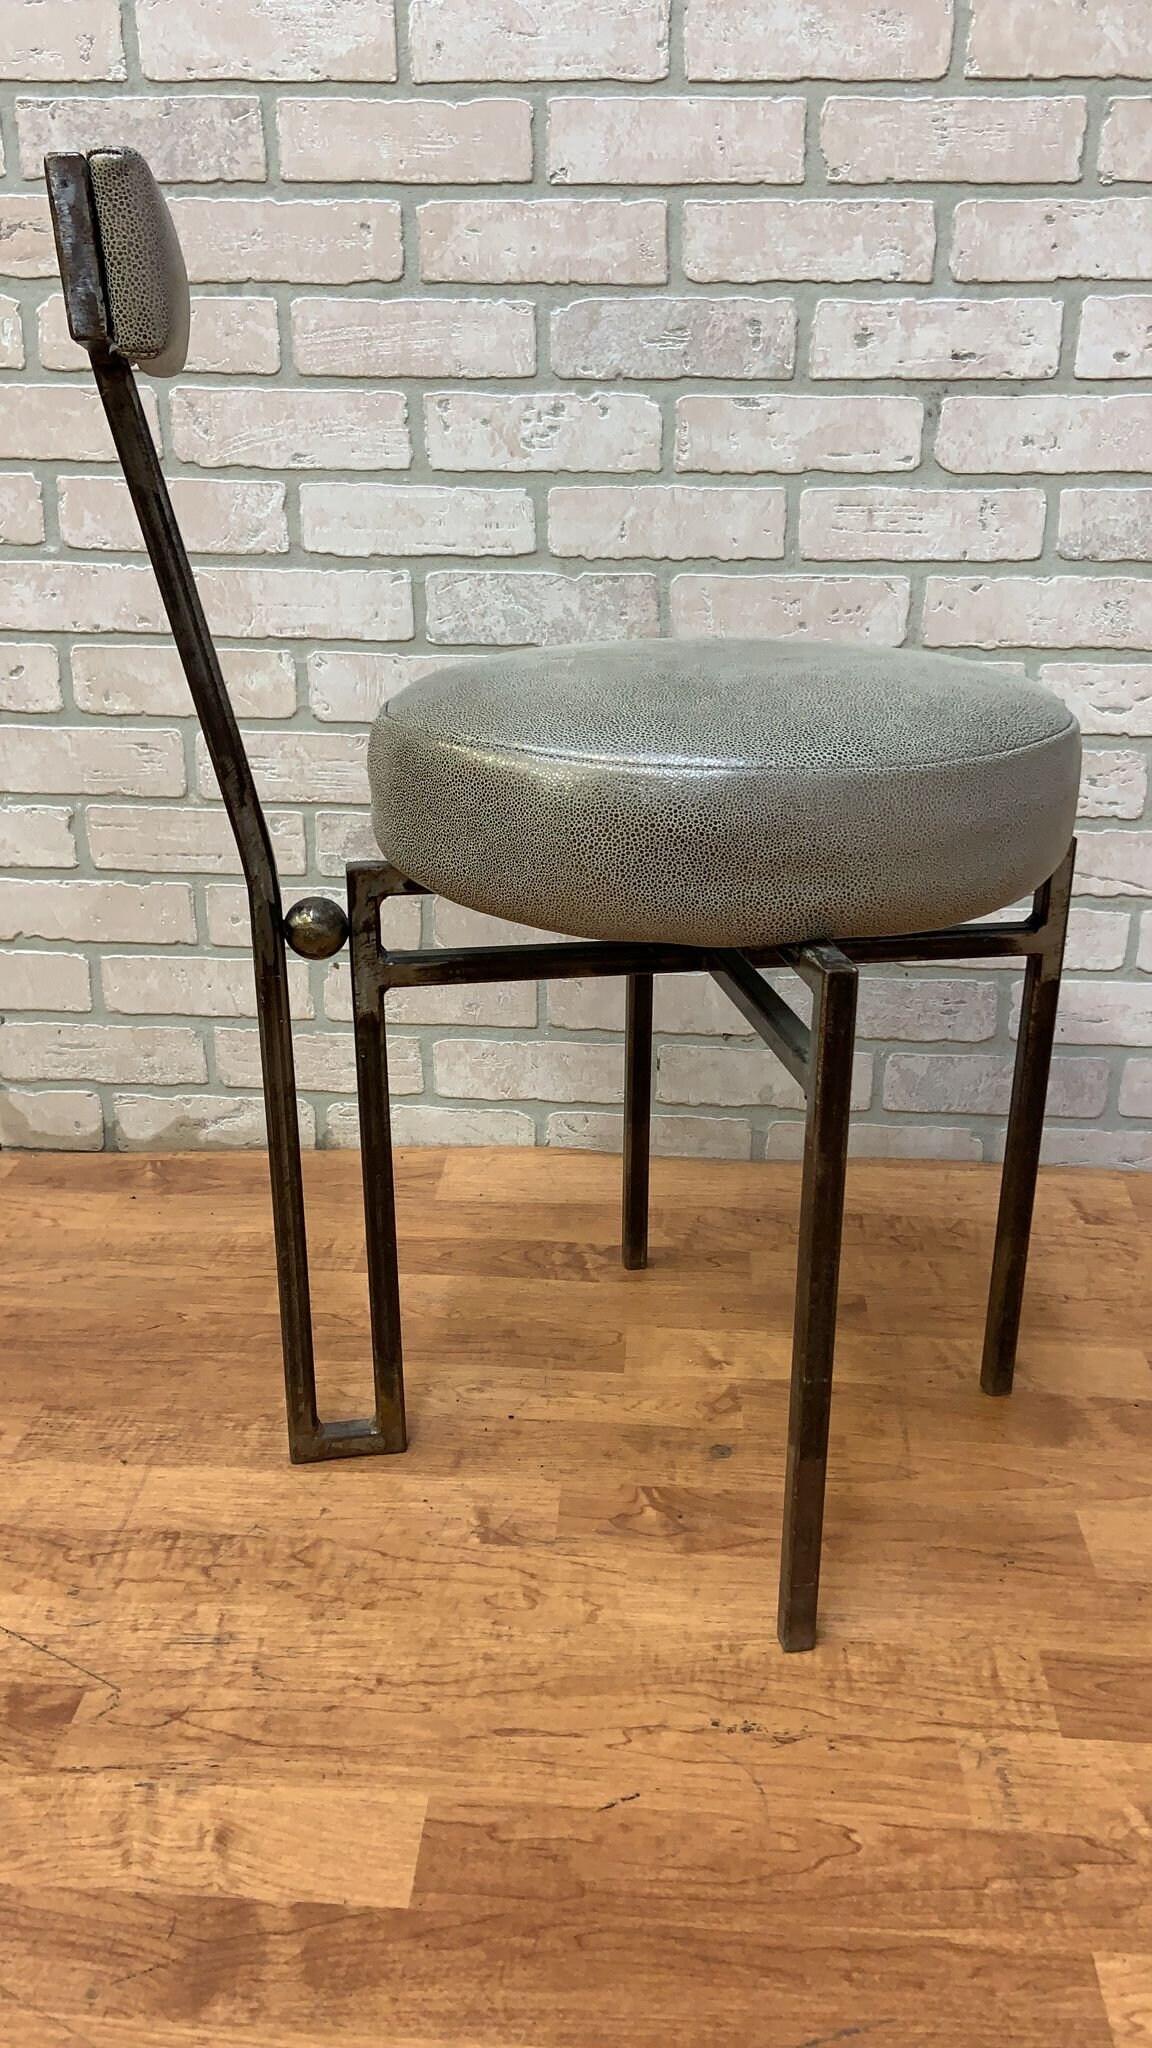 Vintage Modernist Hand Forged Iron Accent Chair Newly Upholstered in Leather For Sale 1